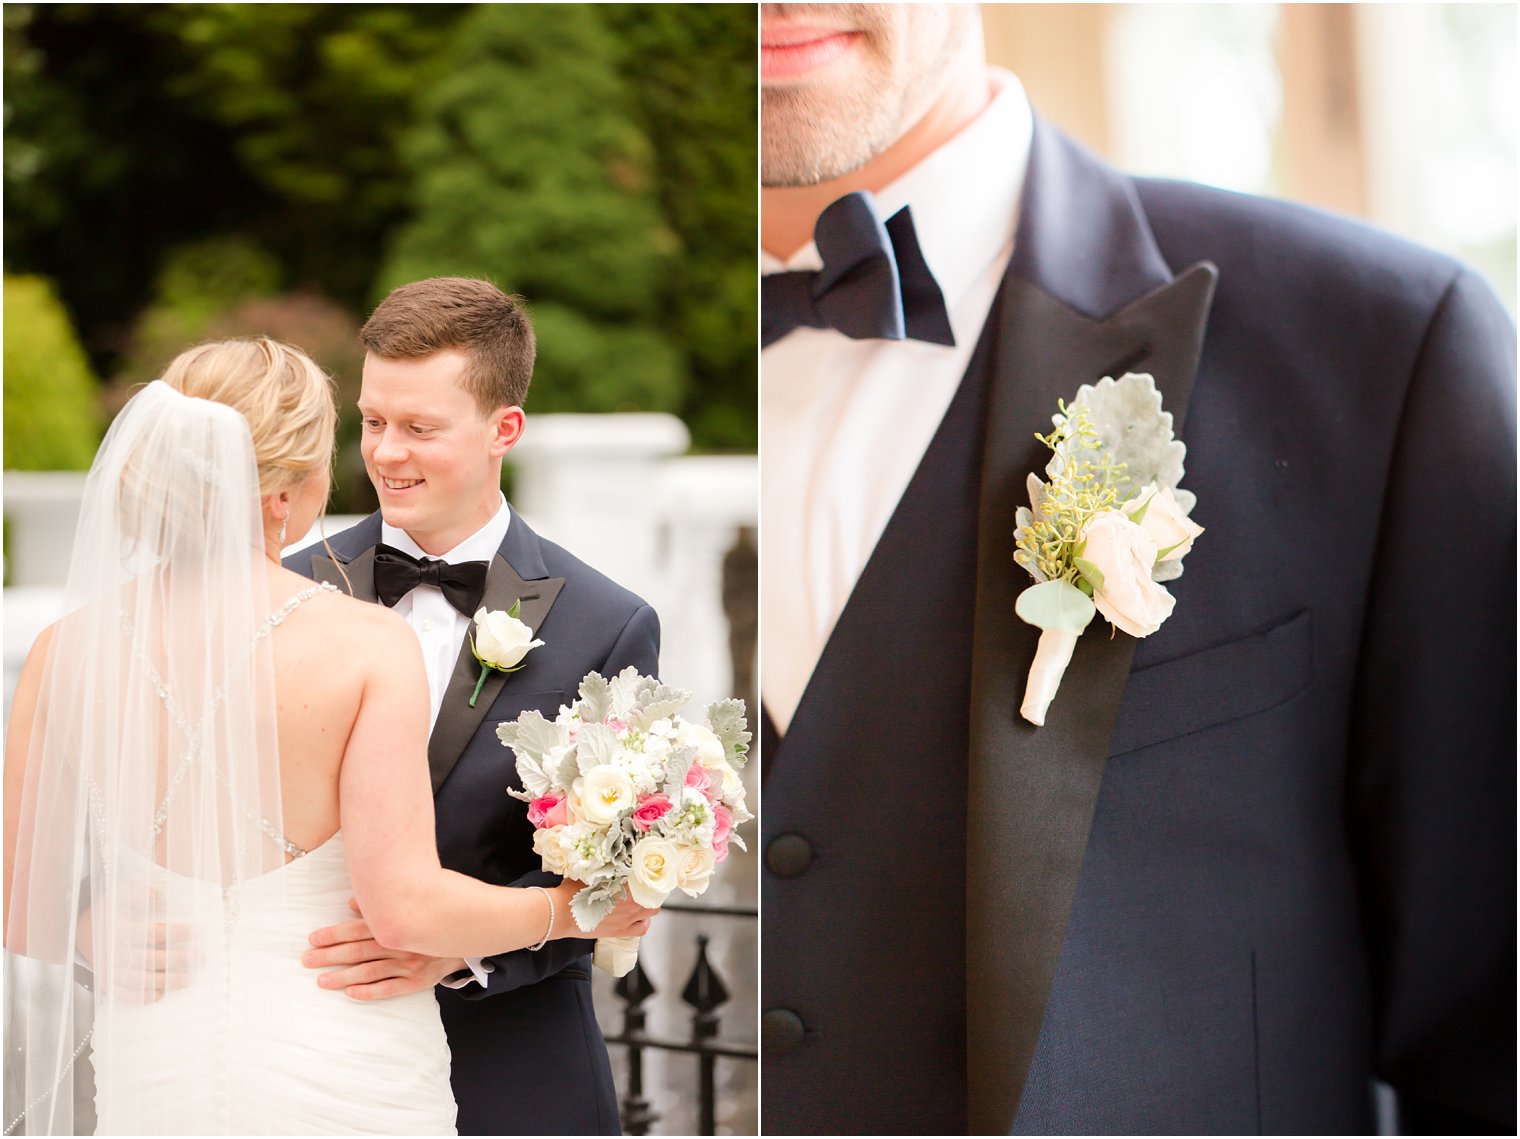 3 Signs Your Wedding Suit or Tux Doesn’t Fit